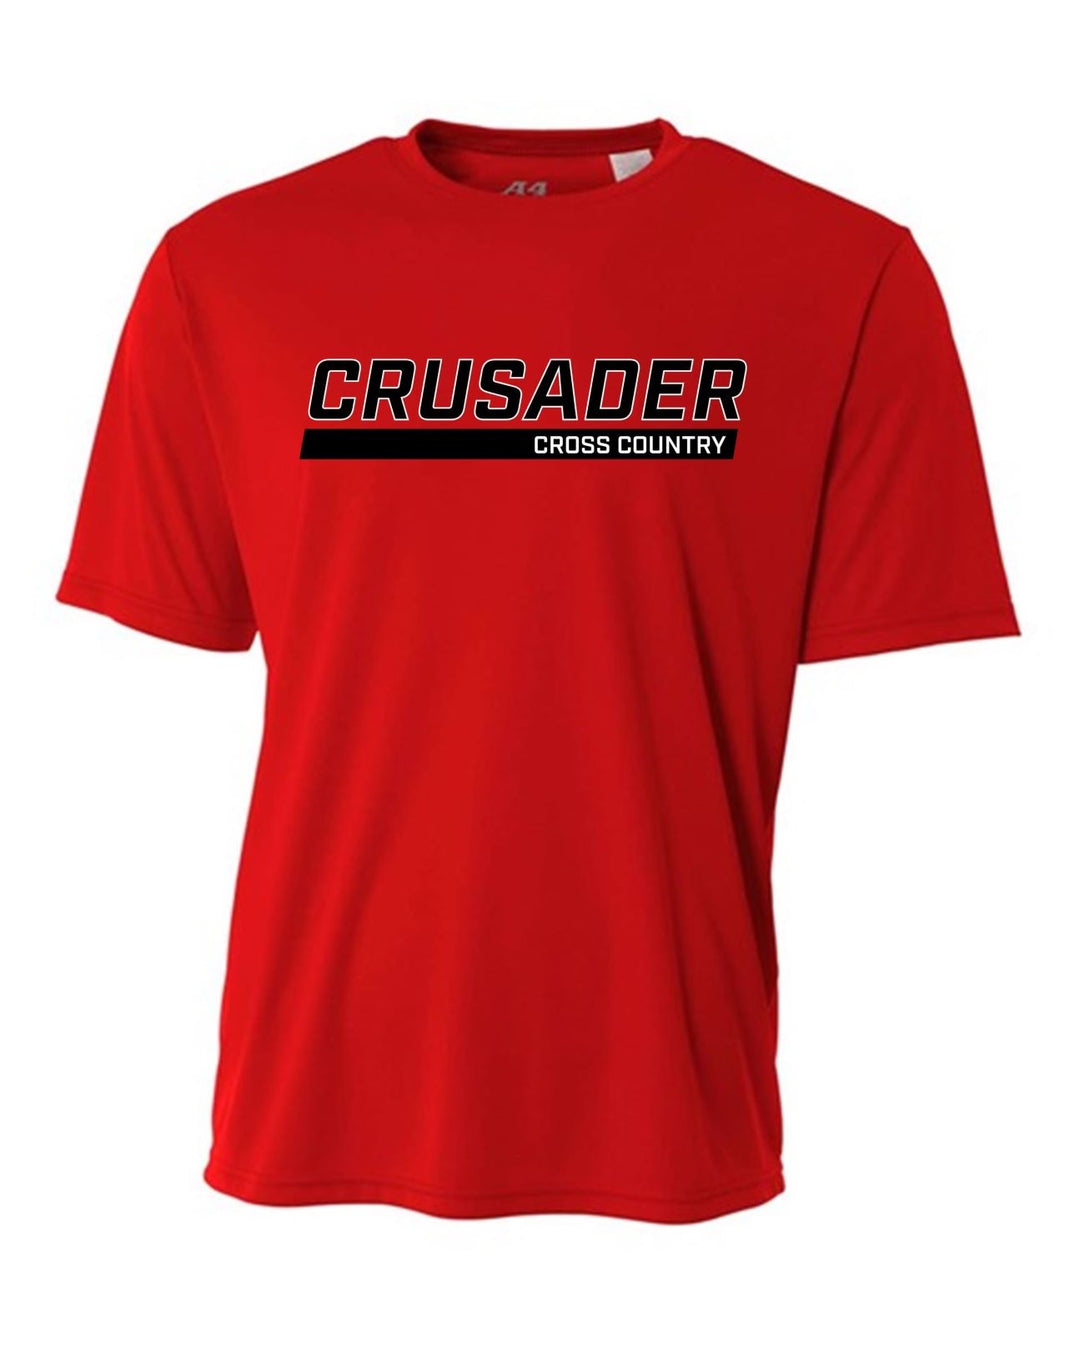 WCU Cross Country Youth Short-Sleeve Performance Shirt WCU Cross Country Red CRUSADER - Third Coast Soccer